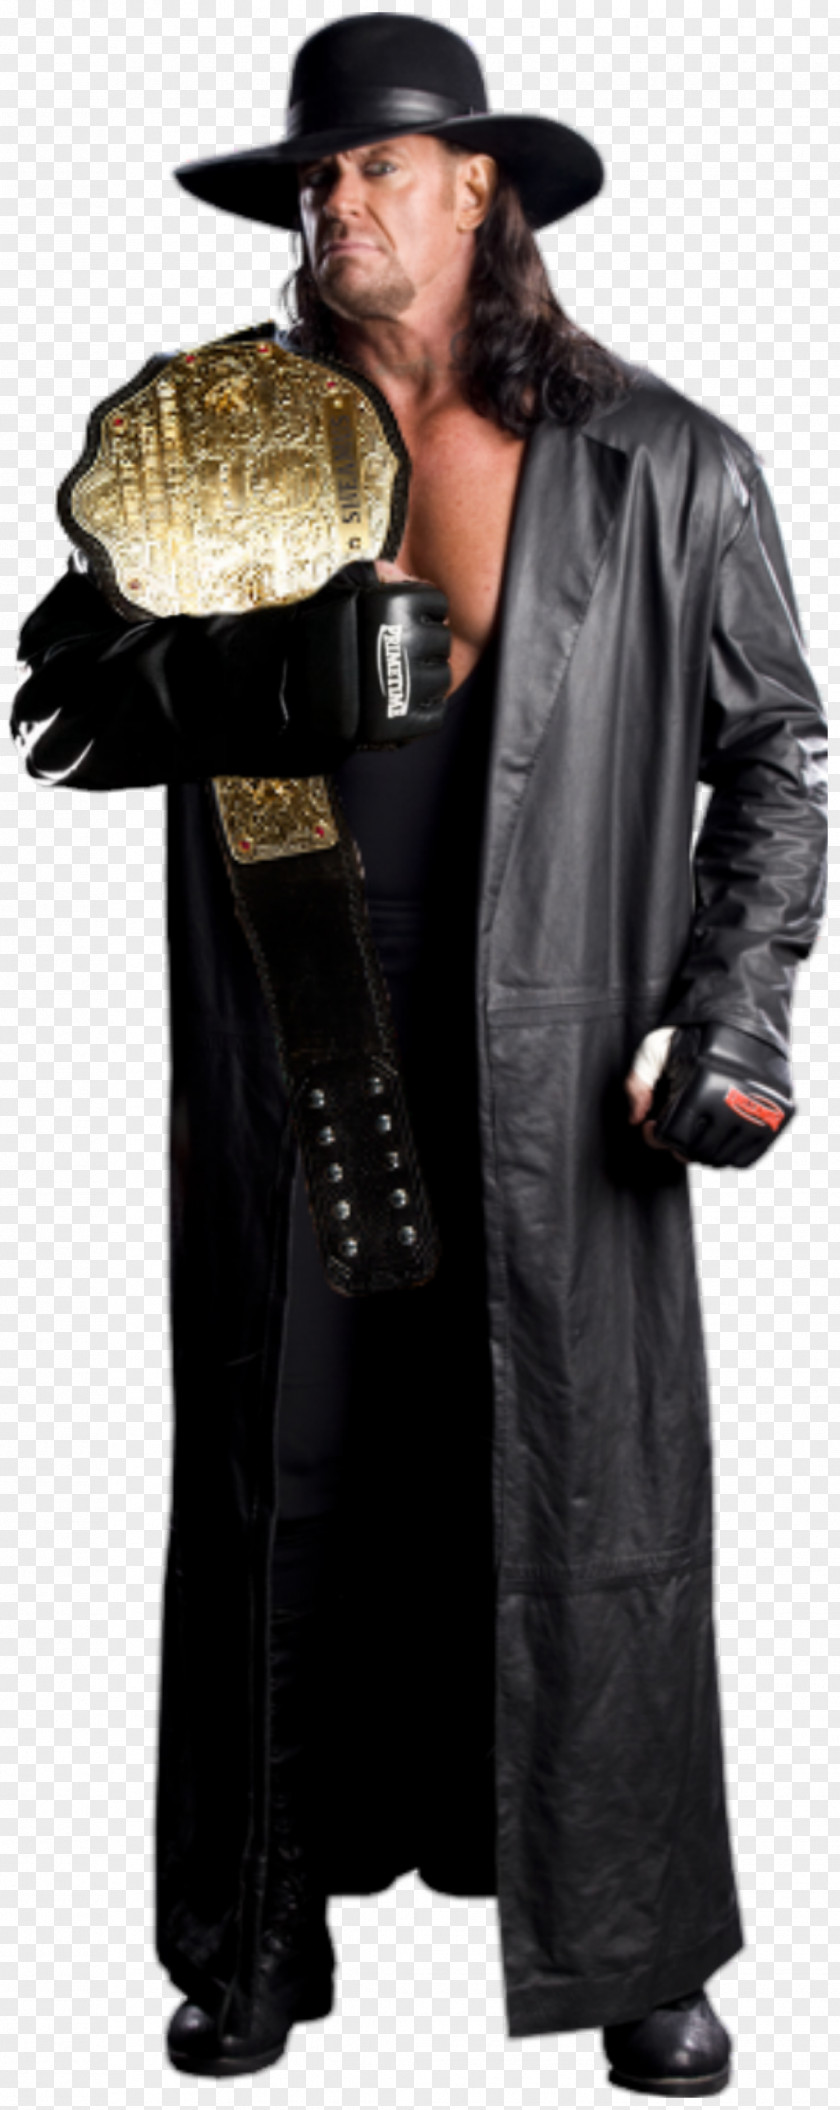 The Undertaker Leather Jacket Trench Coat Clothing PNG